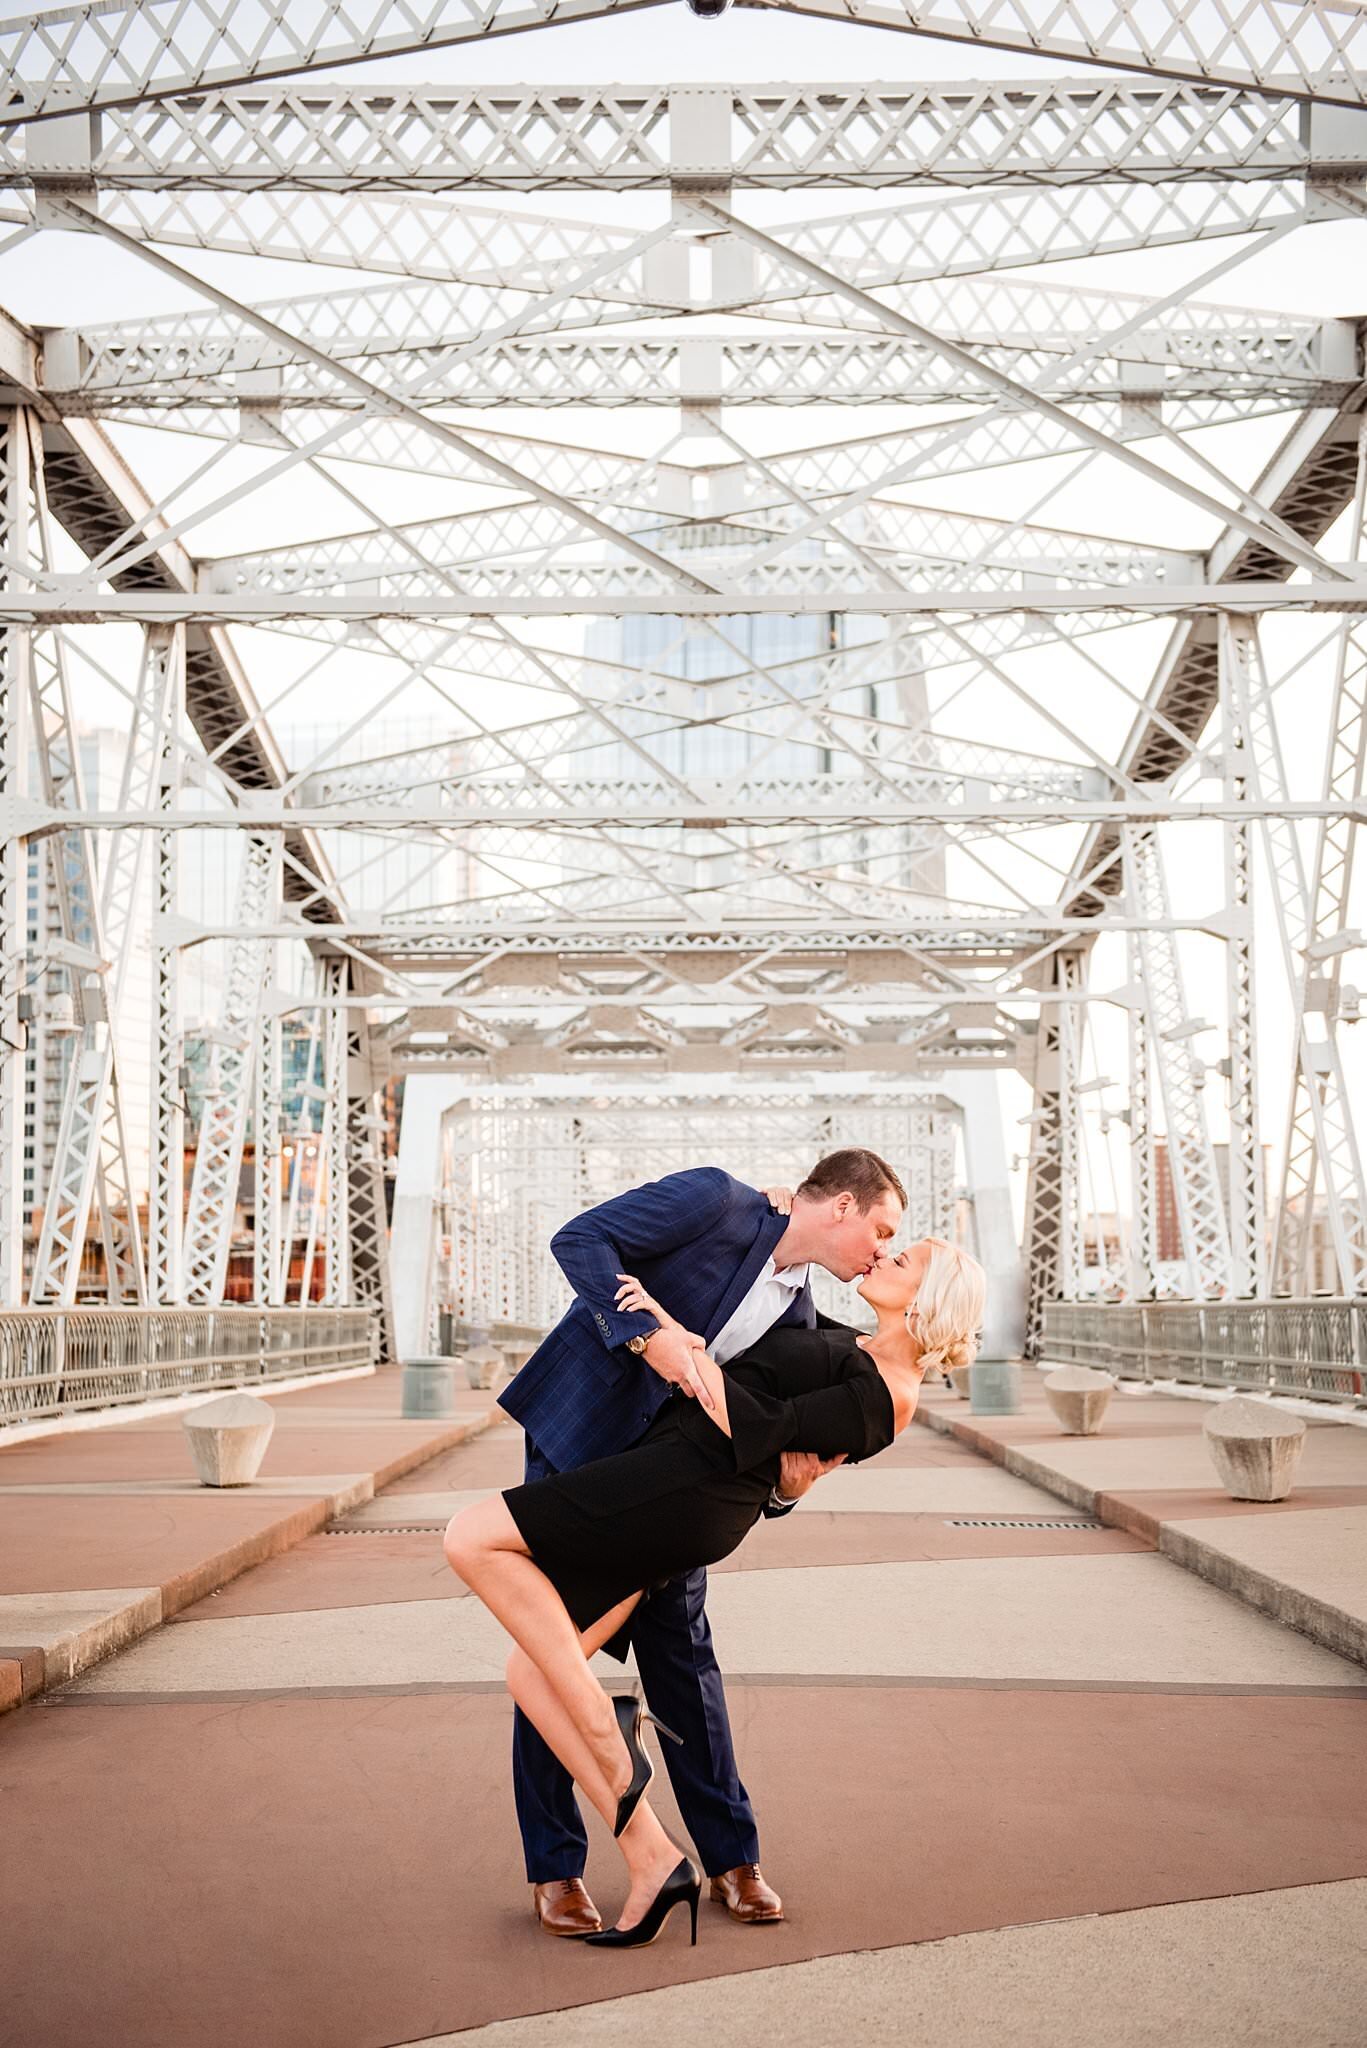 On the bridge at Cumberland River in downtown Nashville, engagement photo with girl wearing sleek black dress and heels with fiance dipping her backwards while sharing a kiss